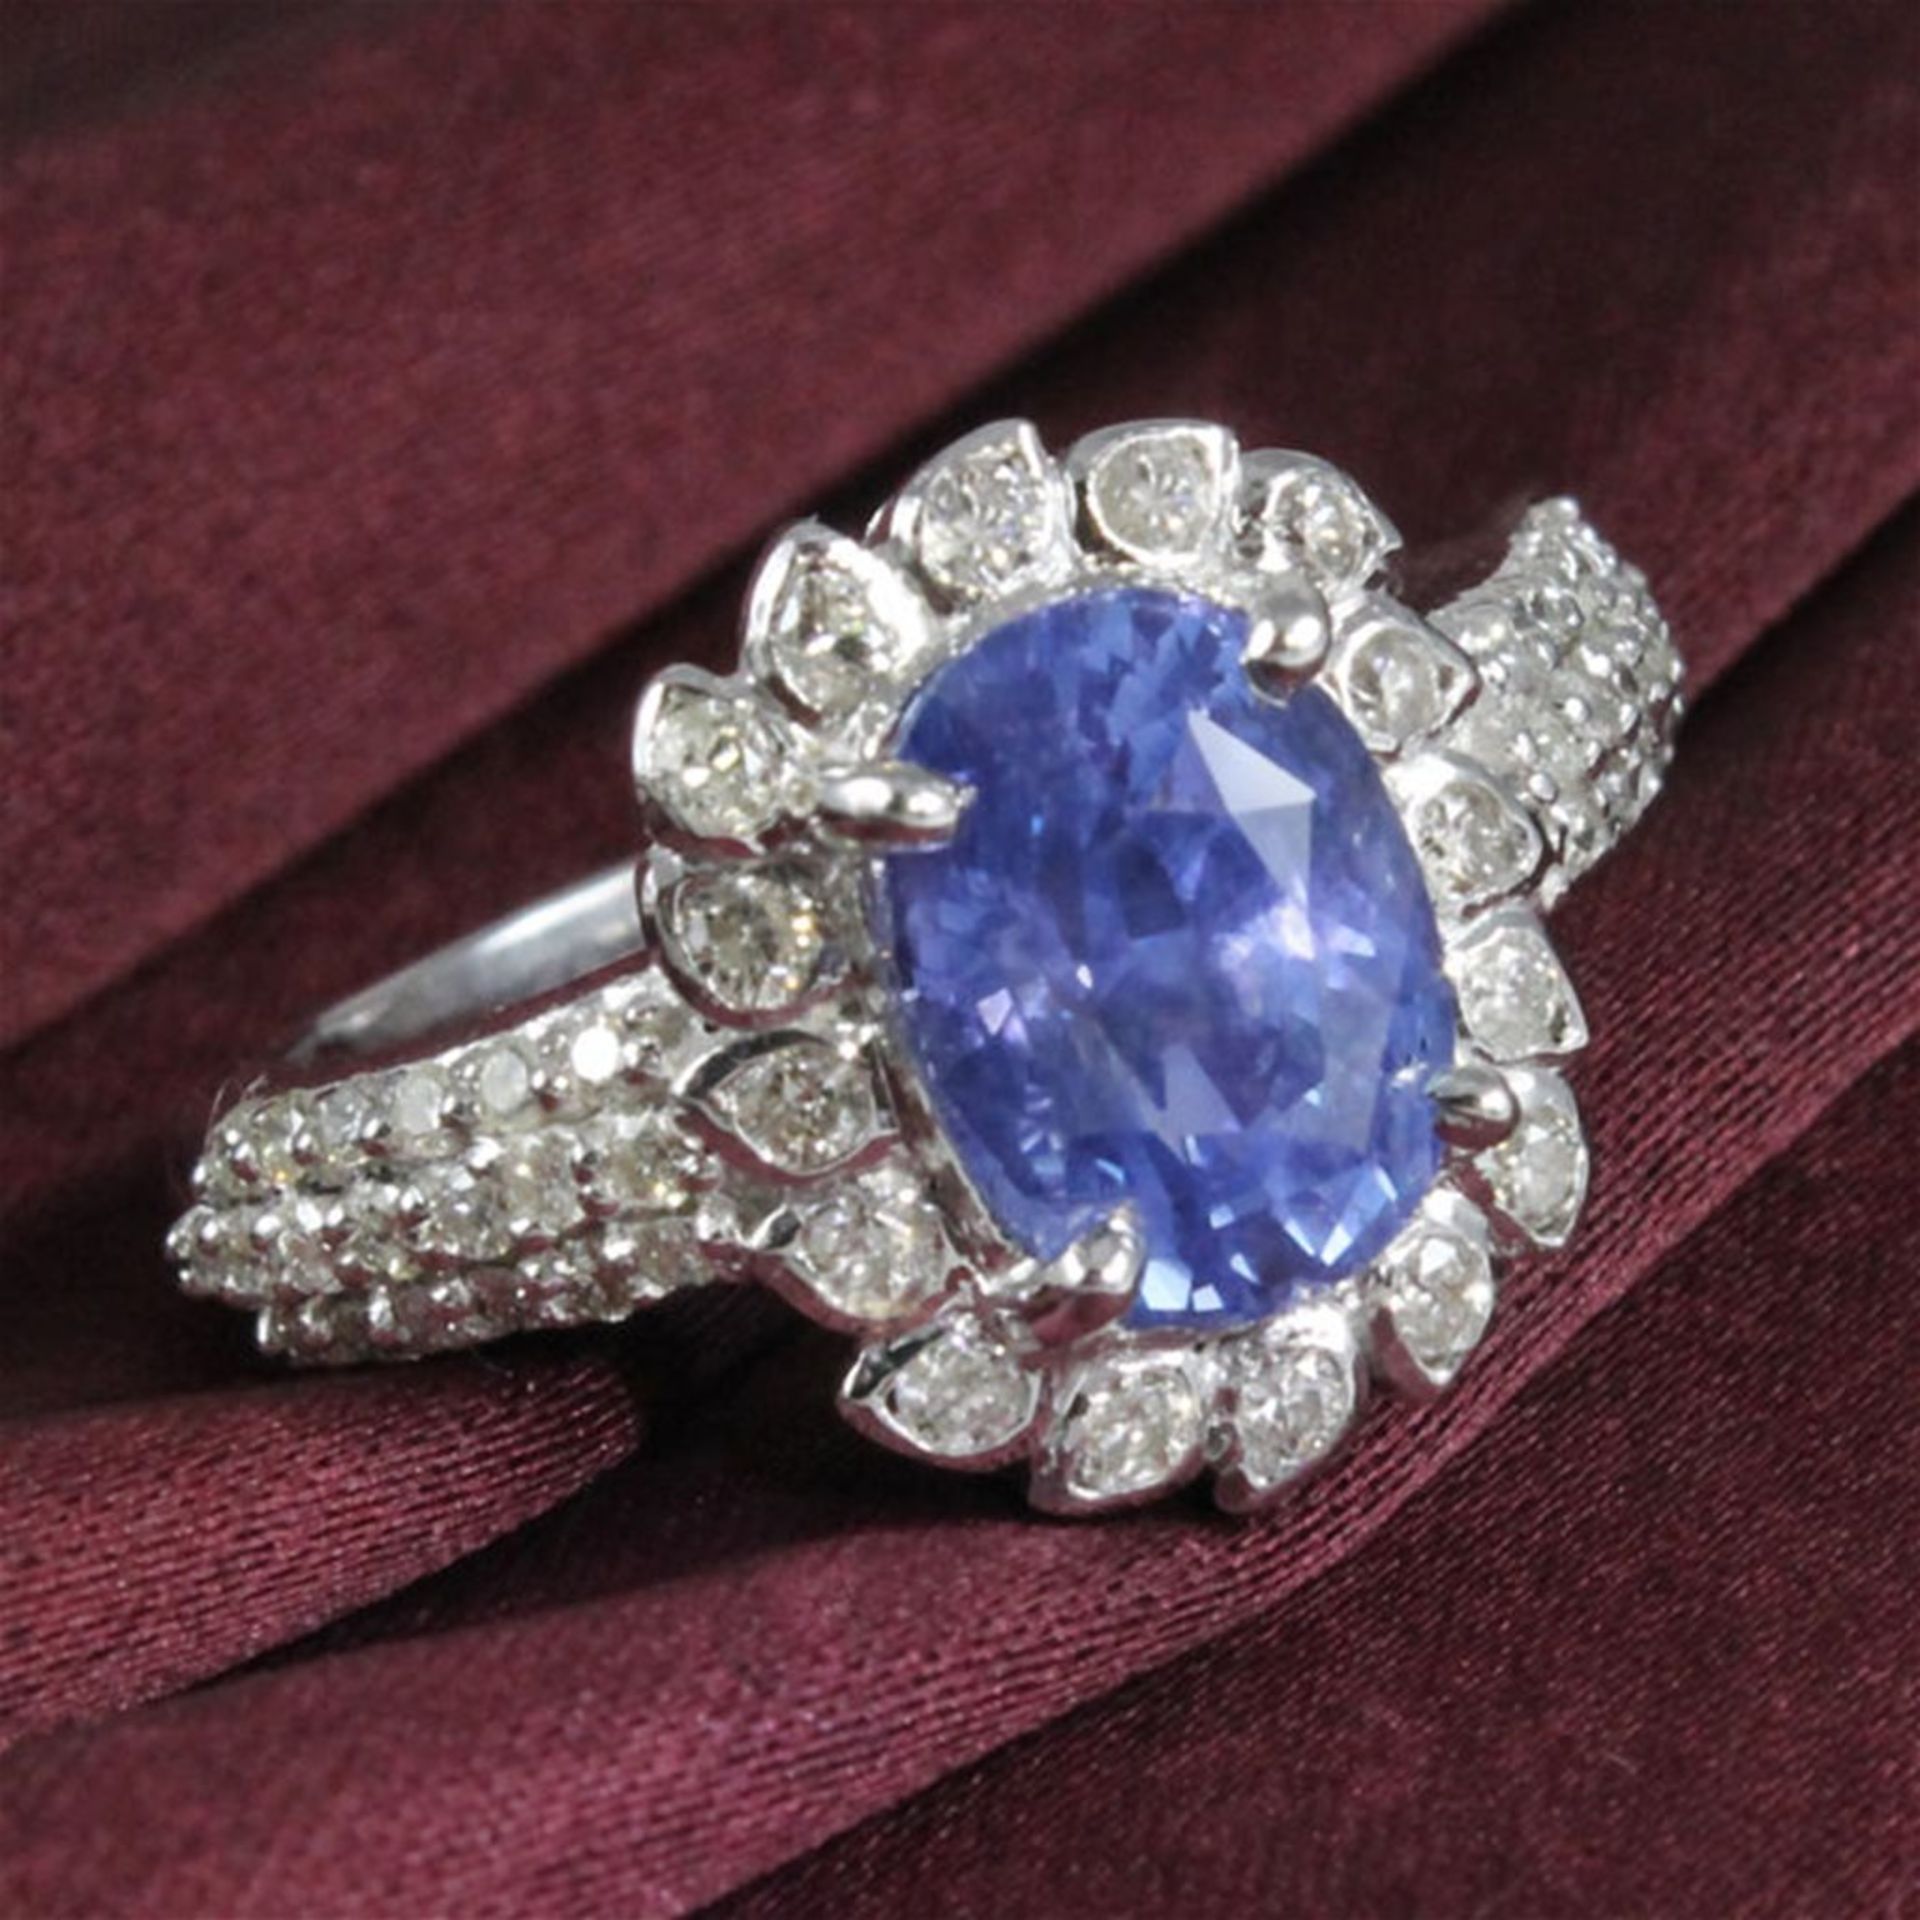 IGI Certified 14 K Very Exclusive Designer White Gold Blue Sapphire and Diamond Ring - Image 3 of 7